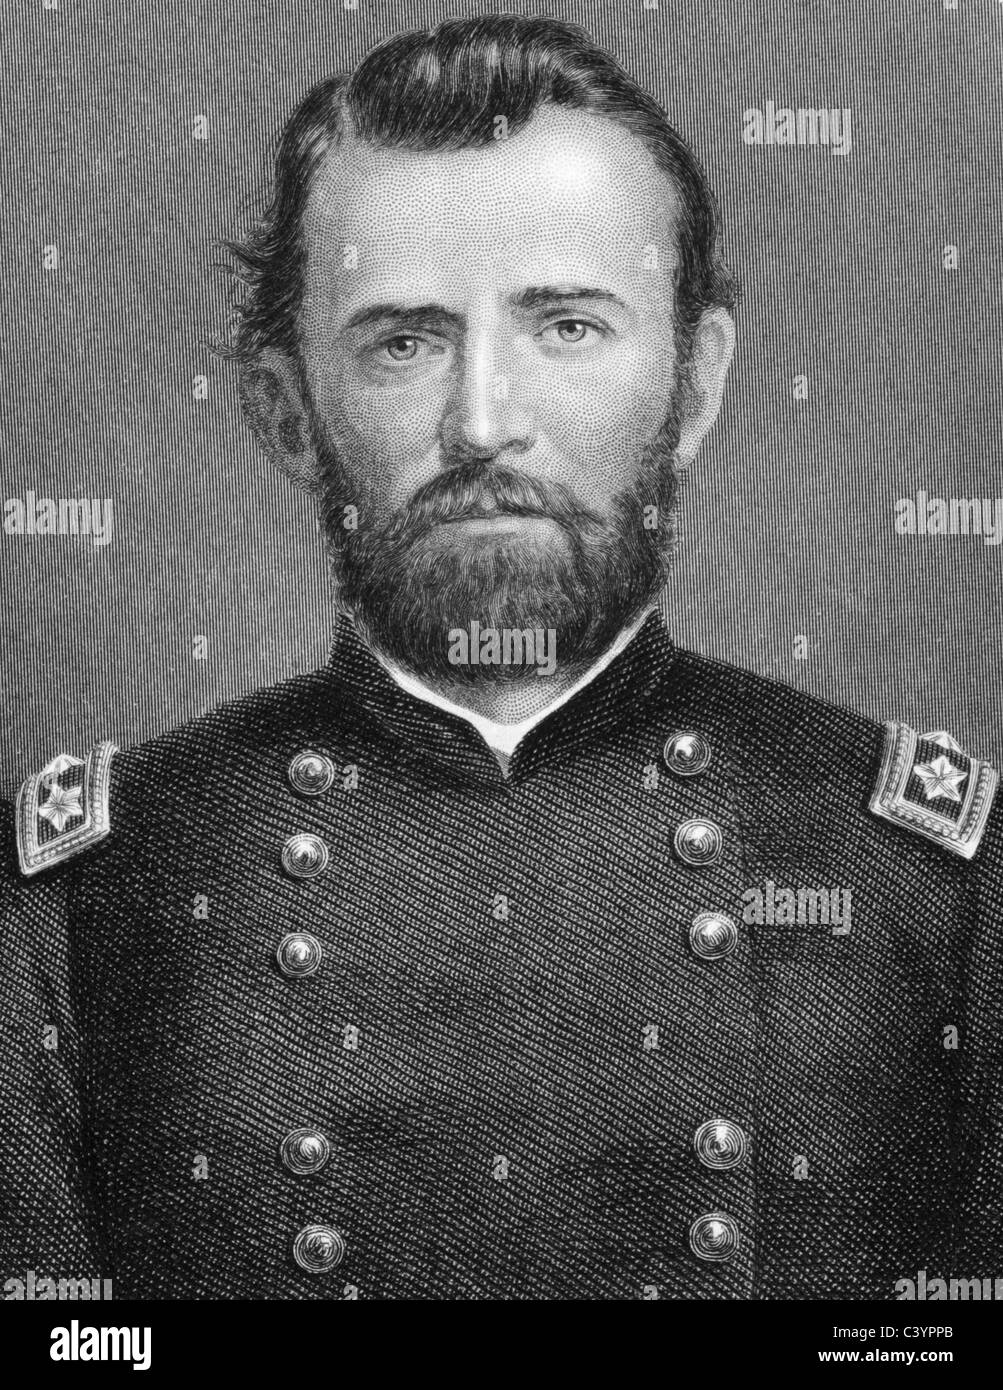 Ulysses S. Grant (1822-1885) on engraving from 1800s. 18th President of the United States (1869-1877) and  military commander. Stock Photo